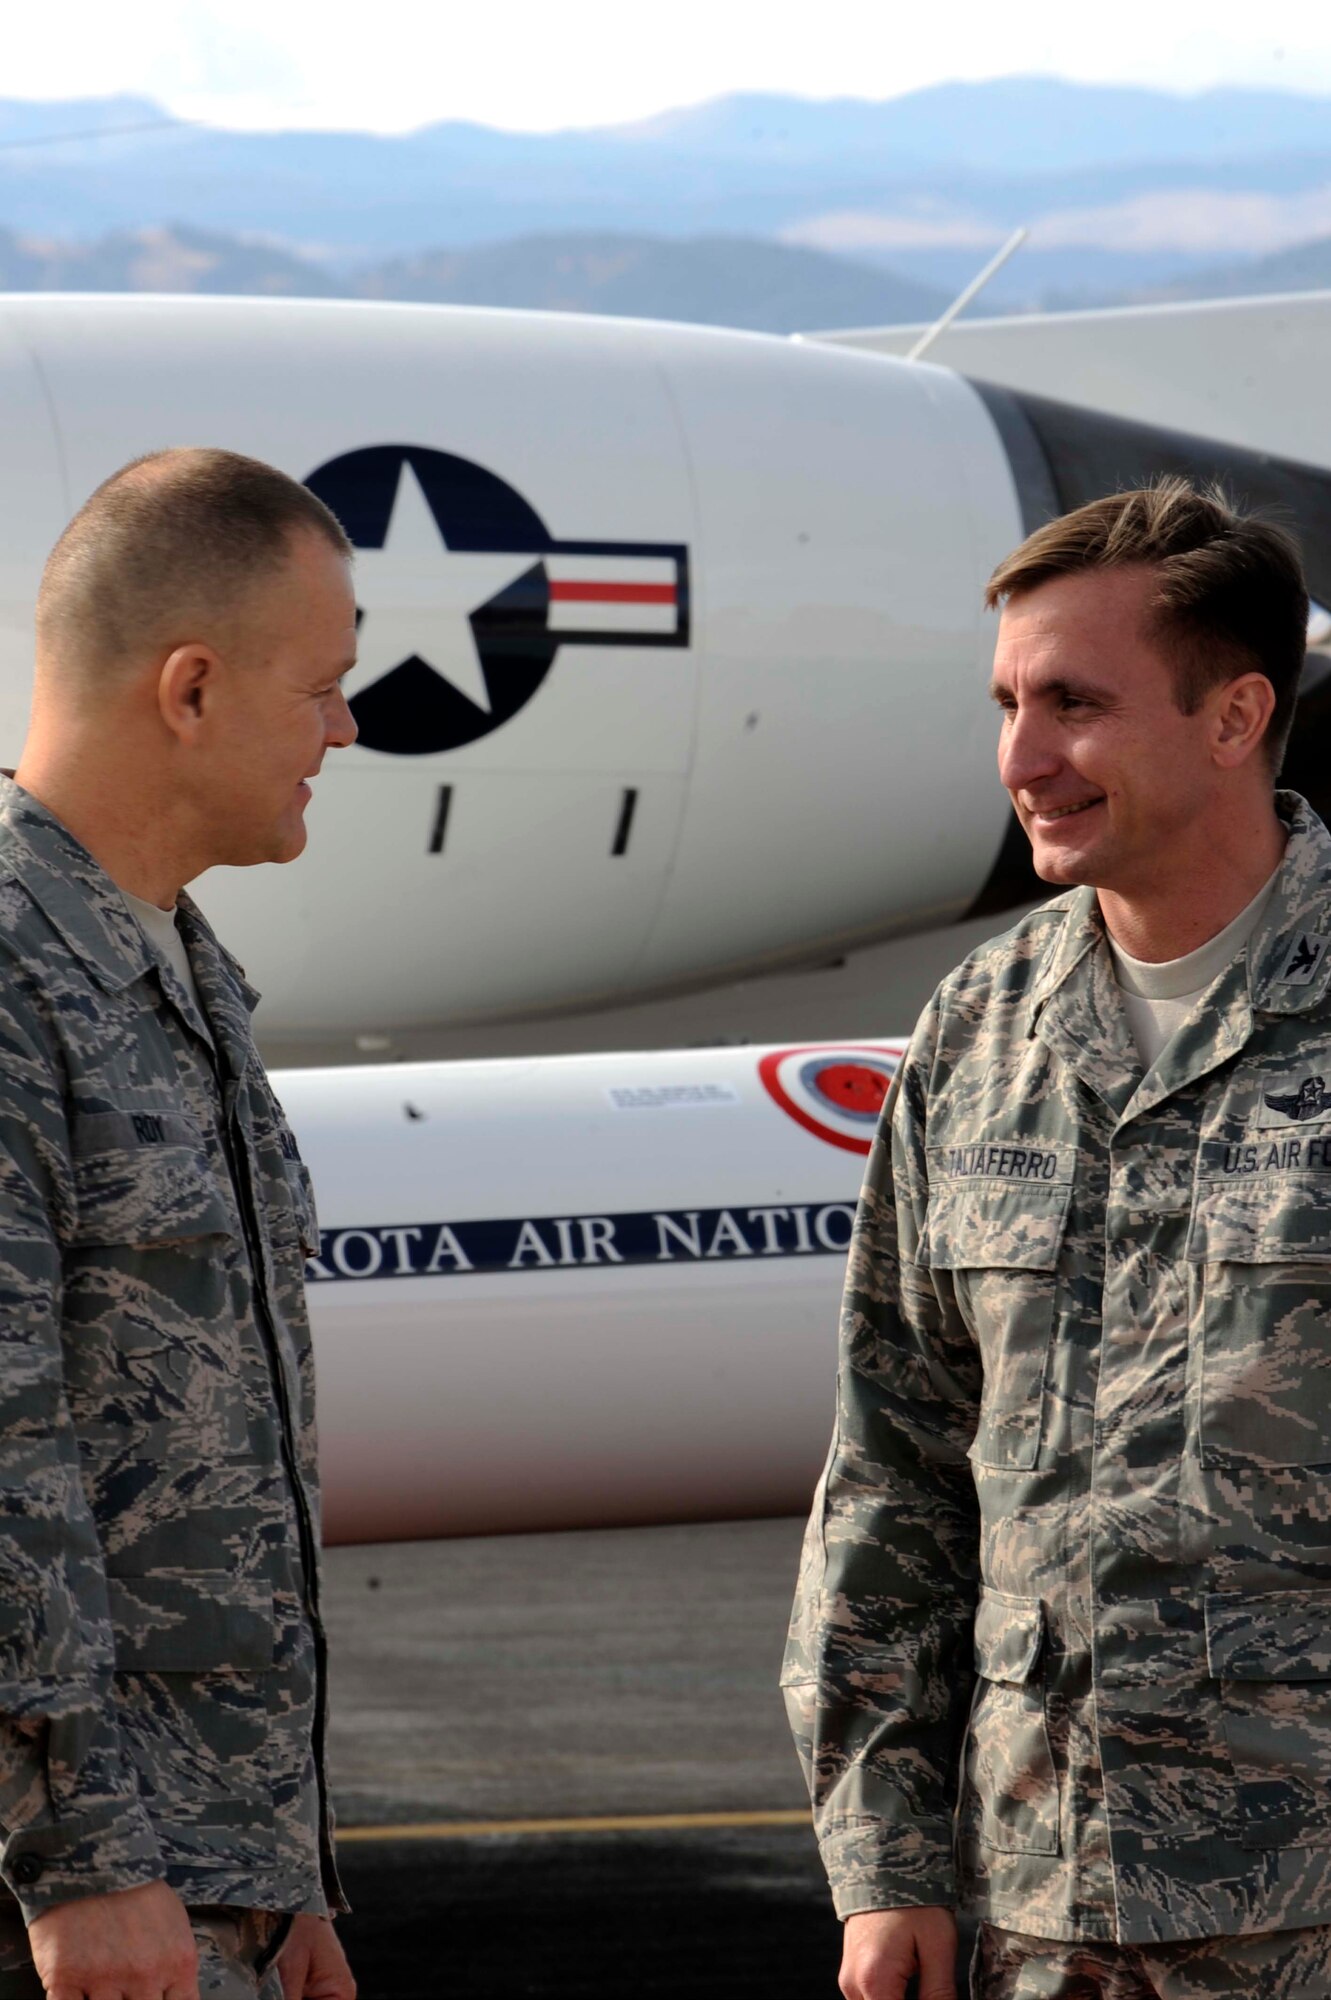 Col. Jeffrey Taliaferro (right), 28th Bomb Wing commander, bids farewell to Chief Master Sgt. of the Air Force James A. Roy, Oct. 22, 2009, following his two-day visit to Ellsworth Air Force Base, S.D.  During the visit, Chief Roy met with Airmen at different venues throughout the base and discussed education, training and deployments and other important Air Force topics. (U.S. Air Force photo/Airman 1st Class Corey Hook)